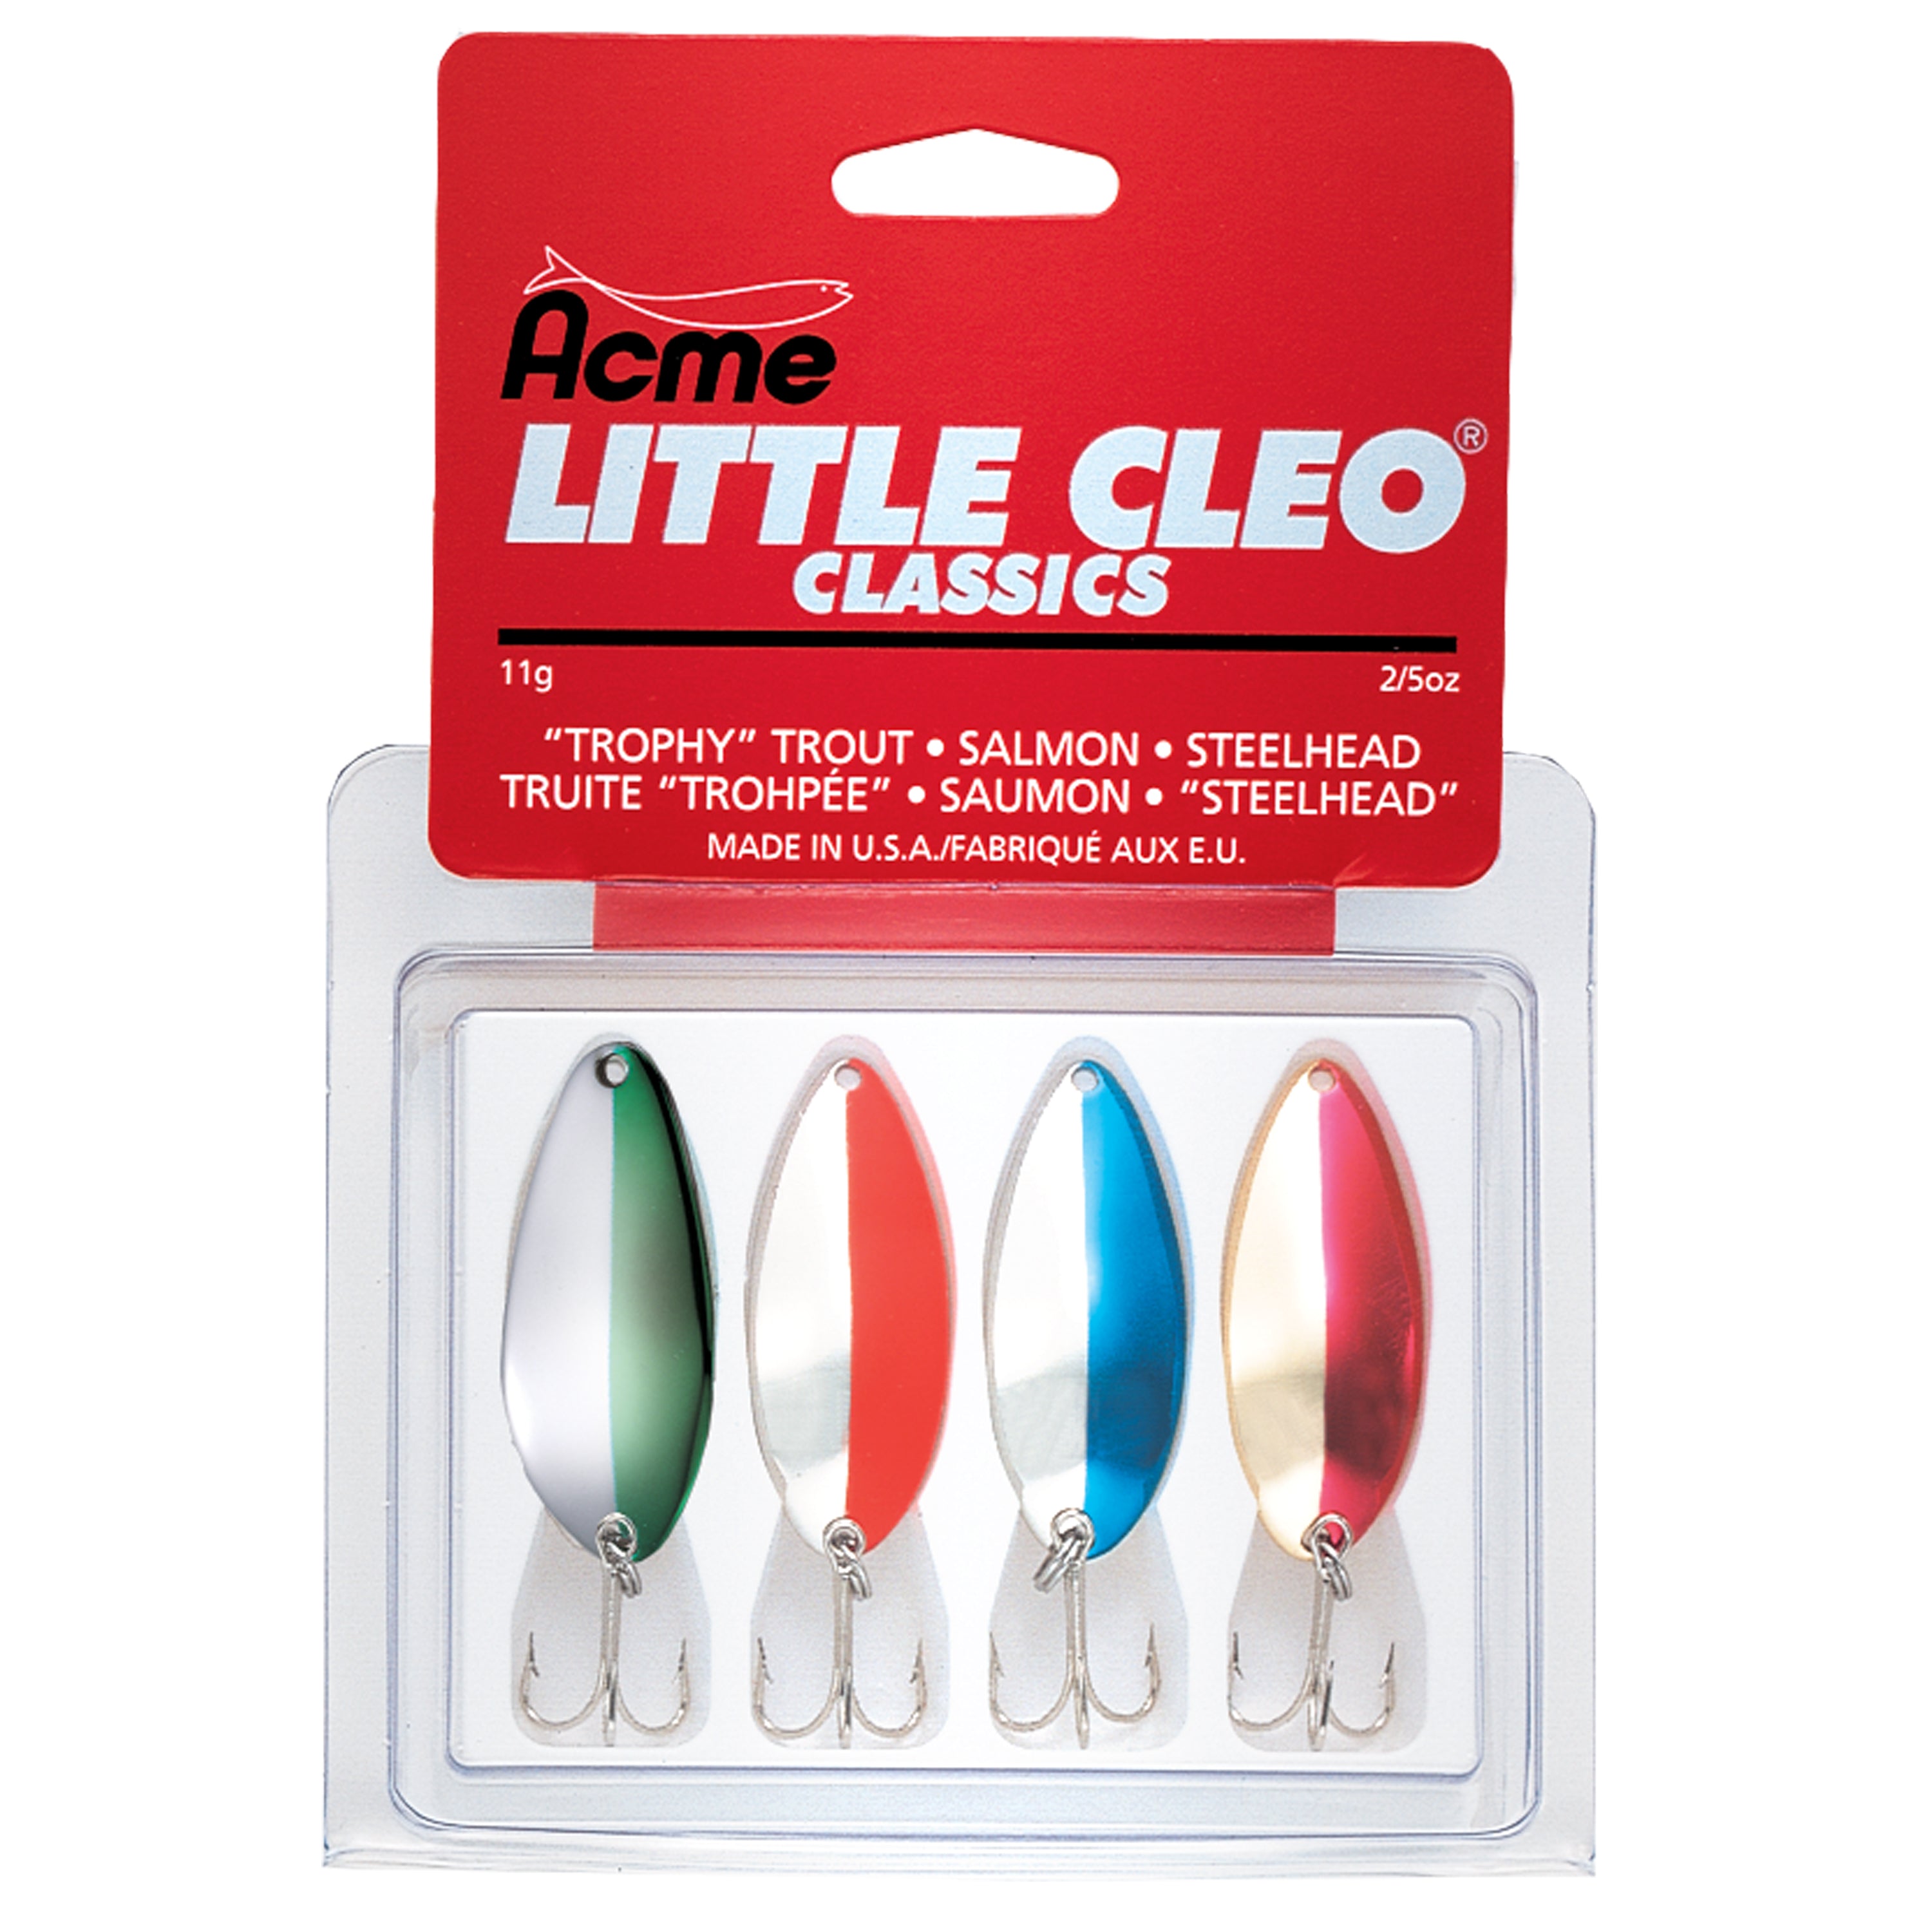 Acme Little Cleo Spoon 3/4oz Salmon Fly - Gagnon Sporting Goods